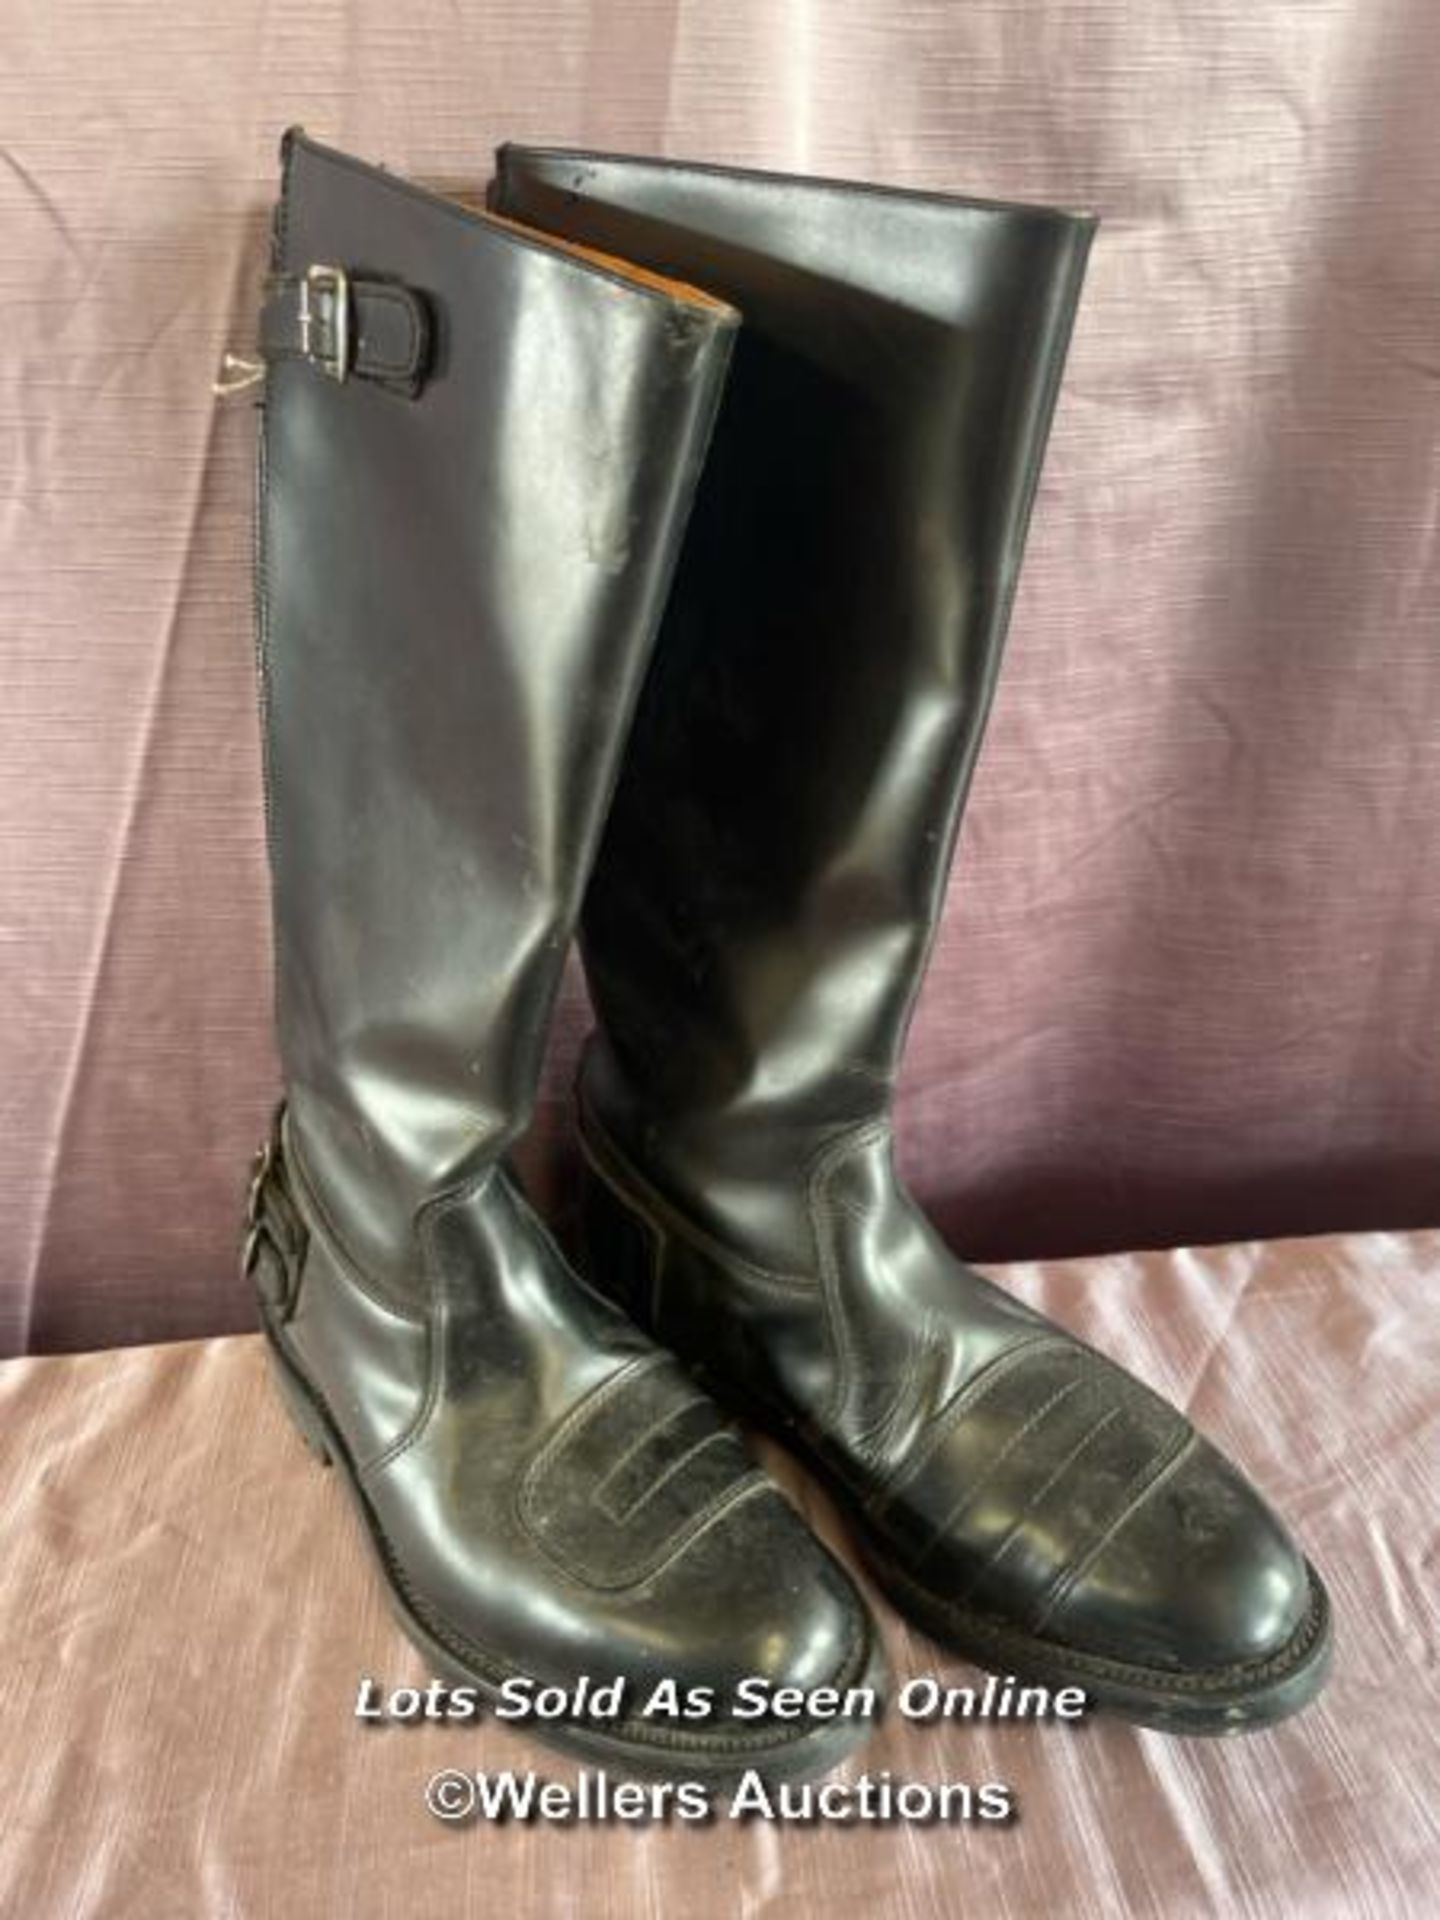 POLICE MOTORCYCLE BOOTS, UN-USED STOCK, SIZE 42